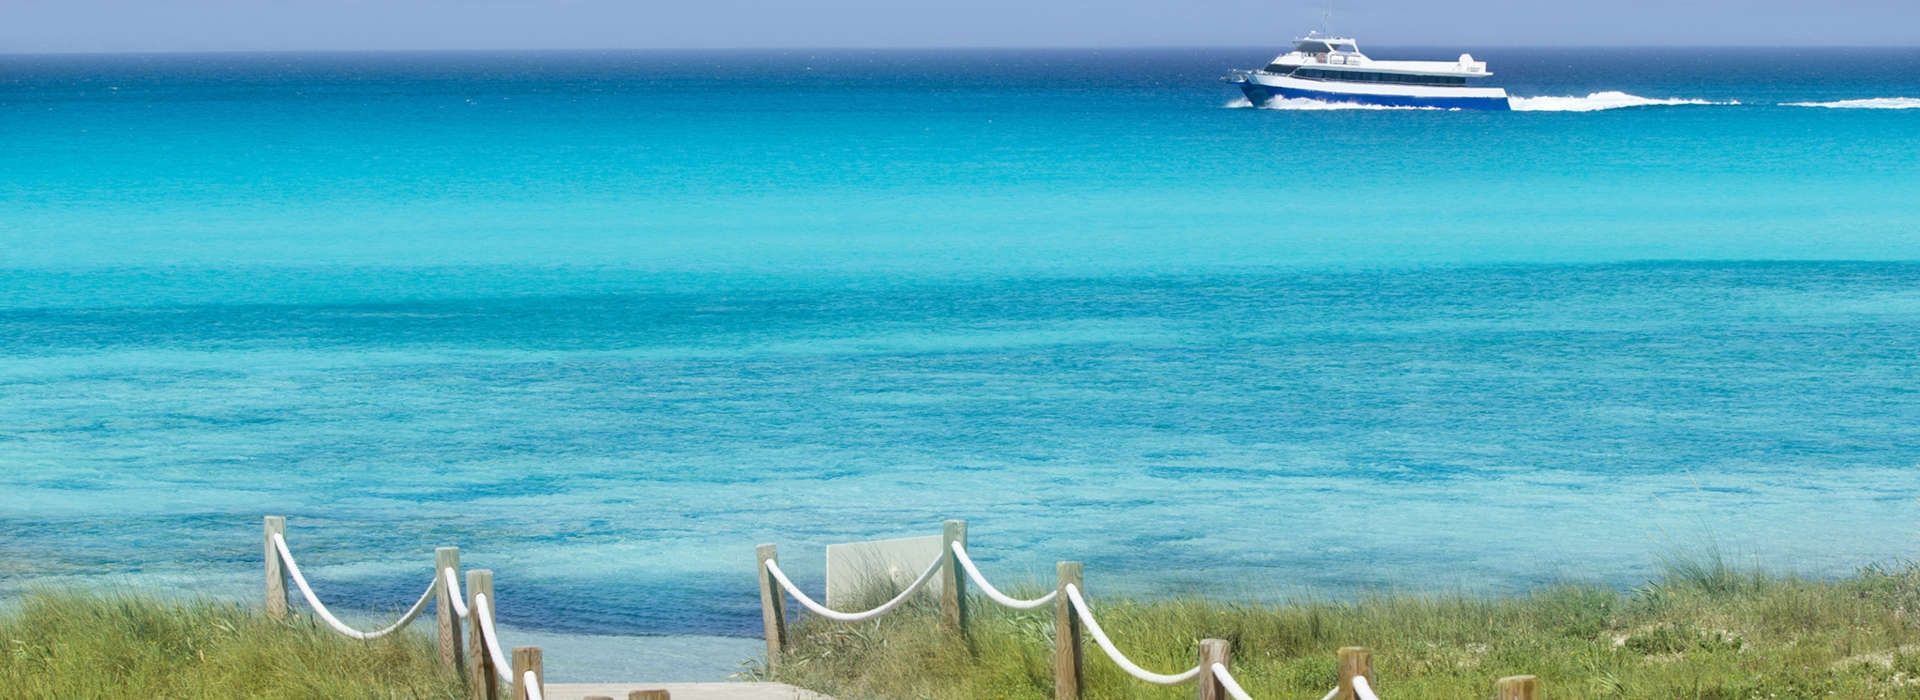 Discover the exciting boat trips to Formentera from our hotel in Playa d'en Bossa, Ibiza